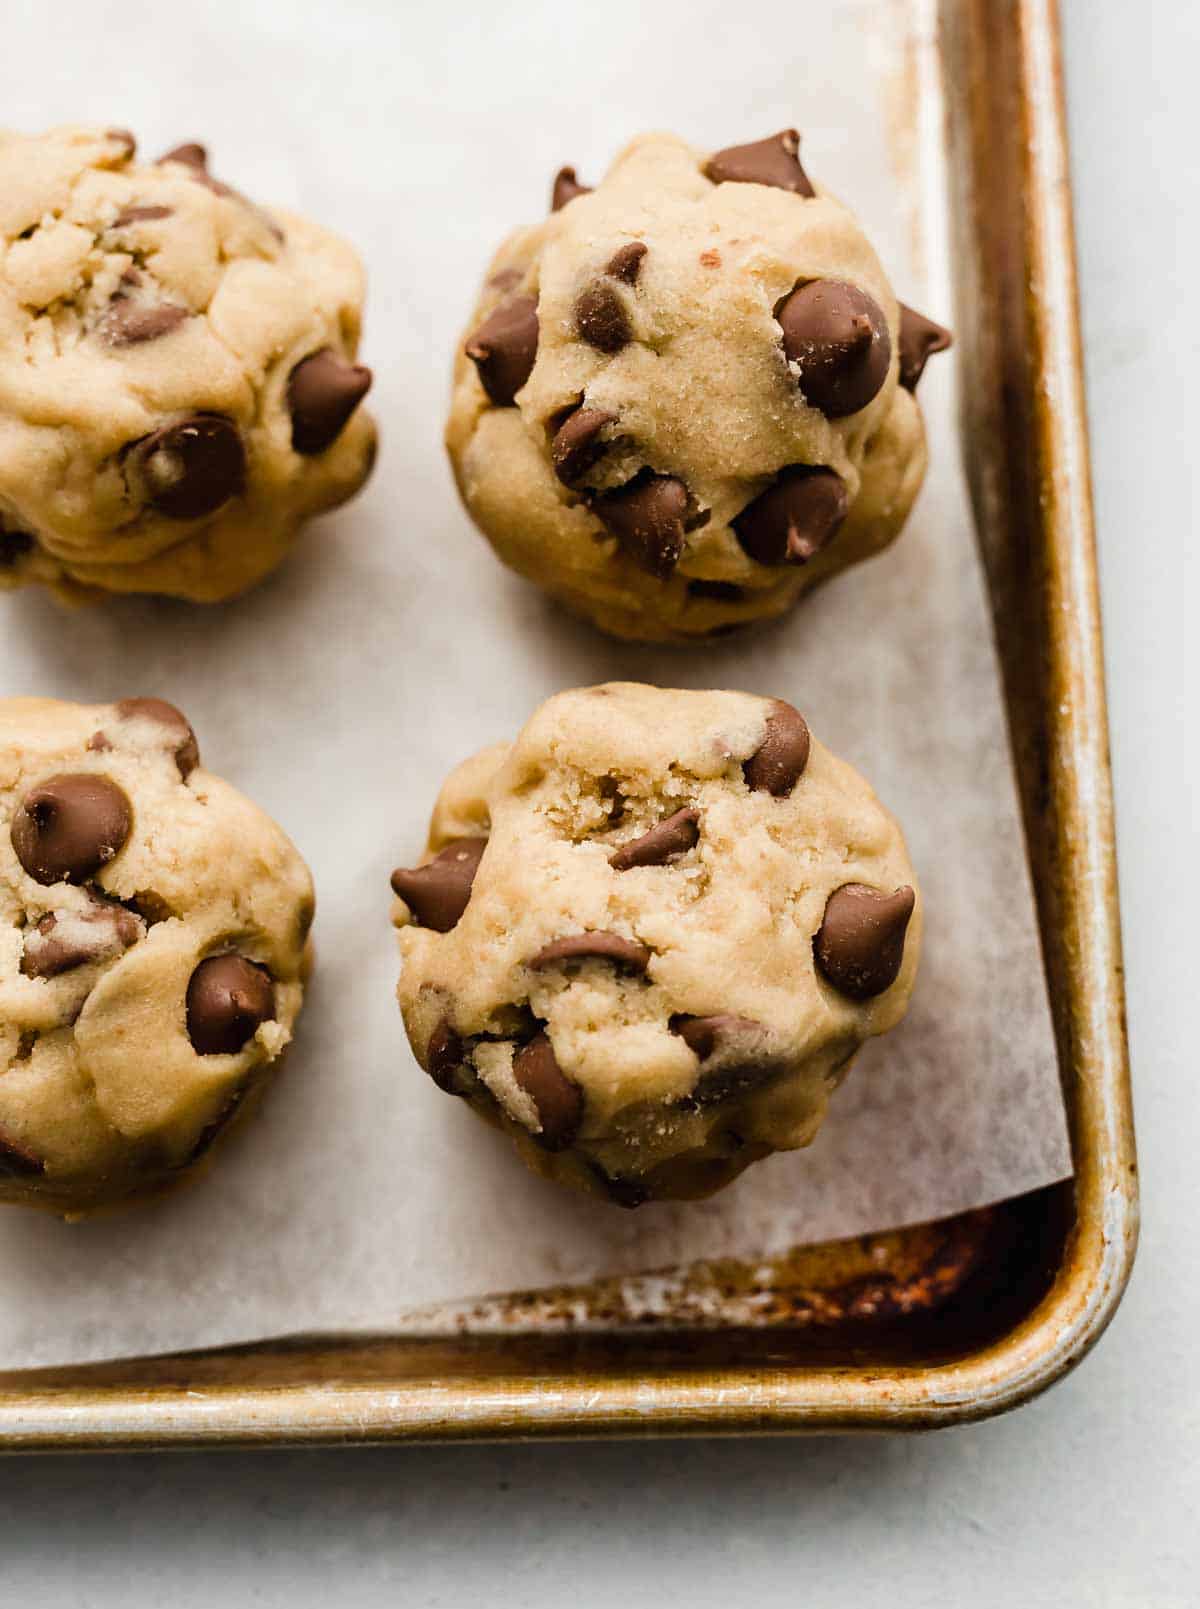 Crumbl Chocolate Chip Cookie dough balls on a parchment lined baking sheet.